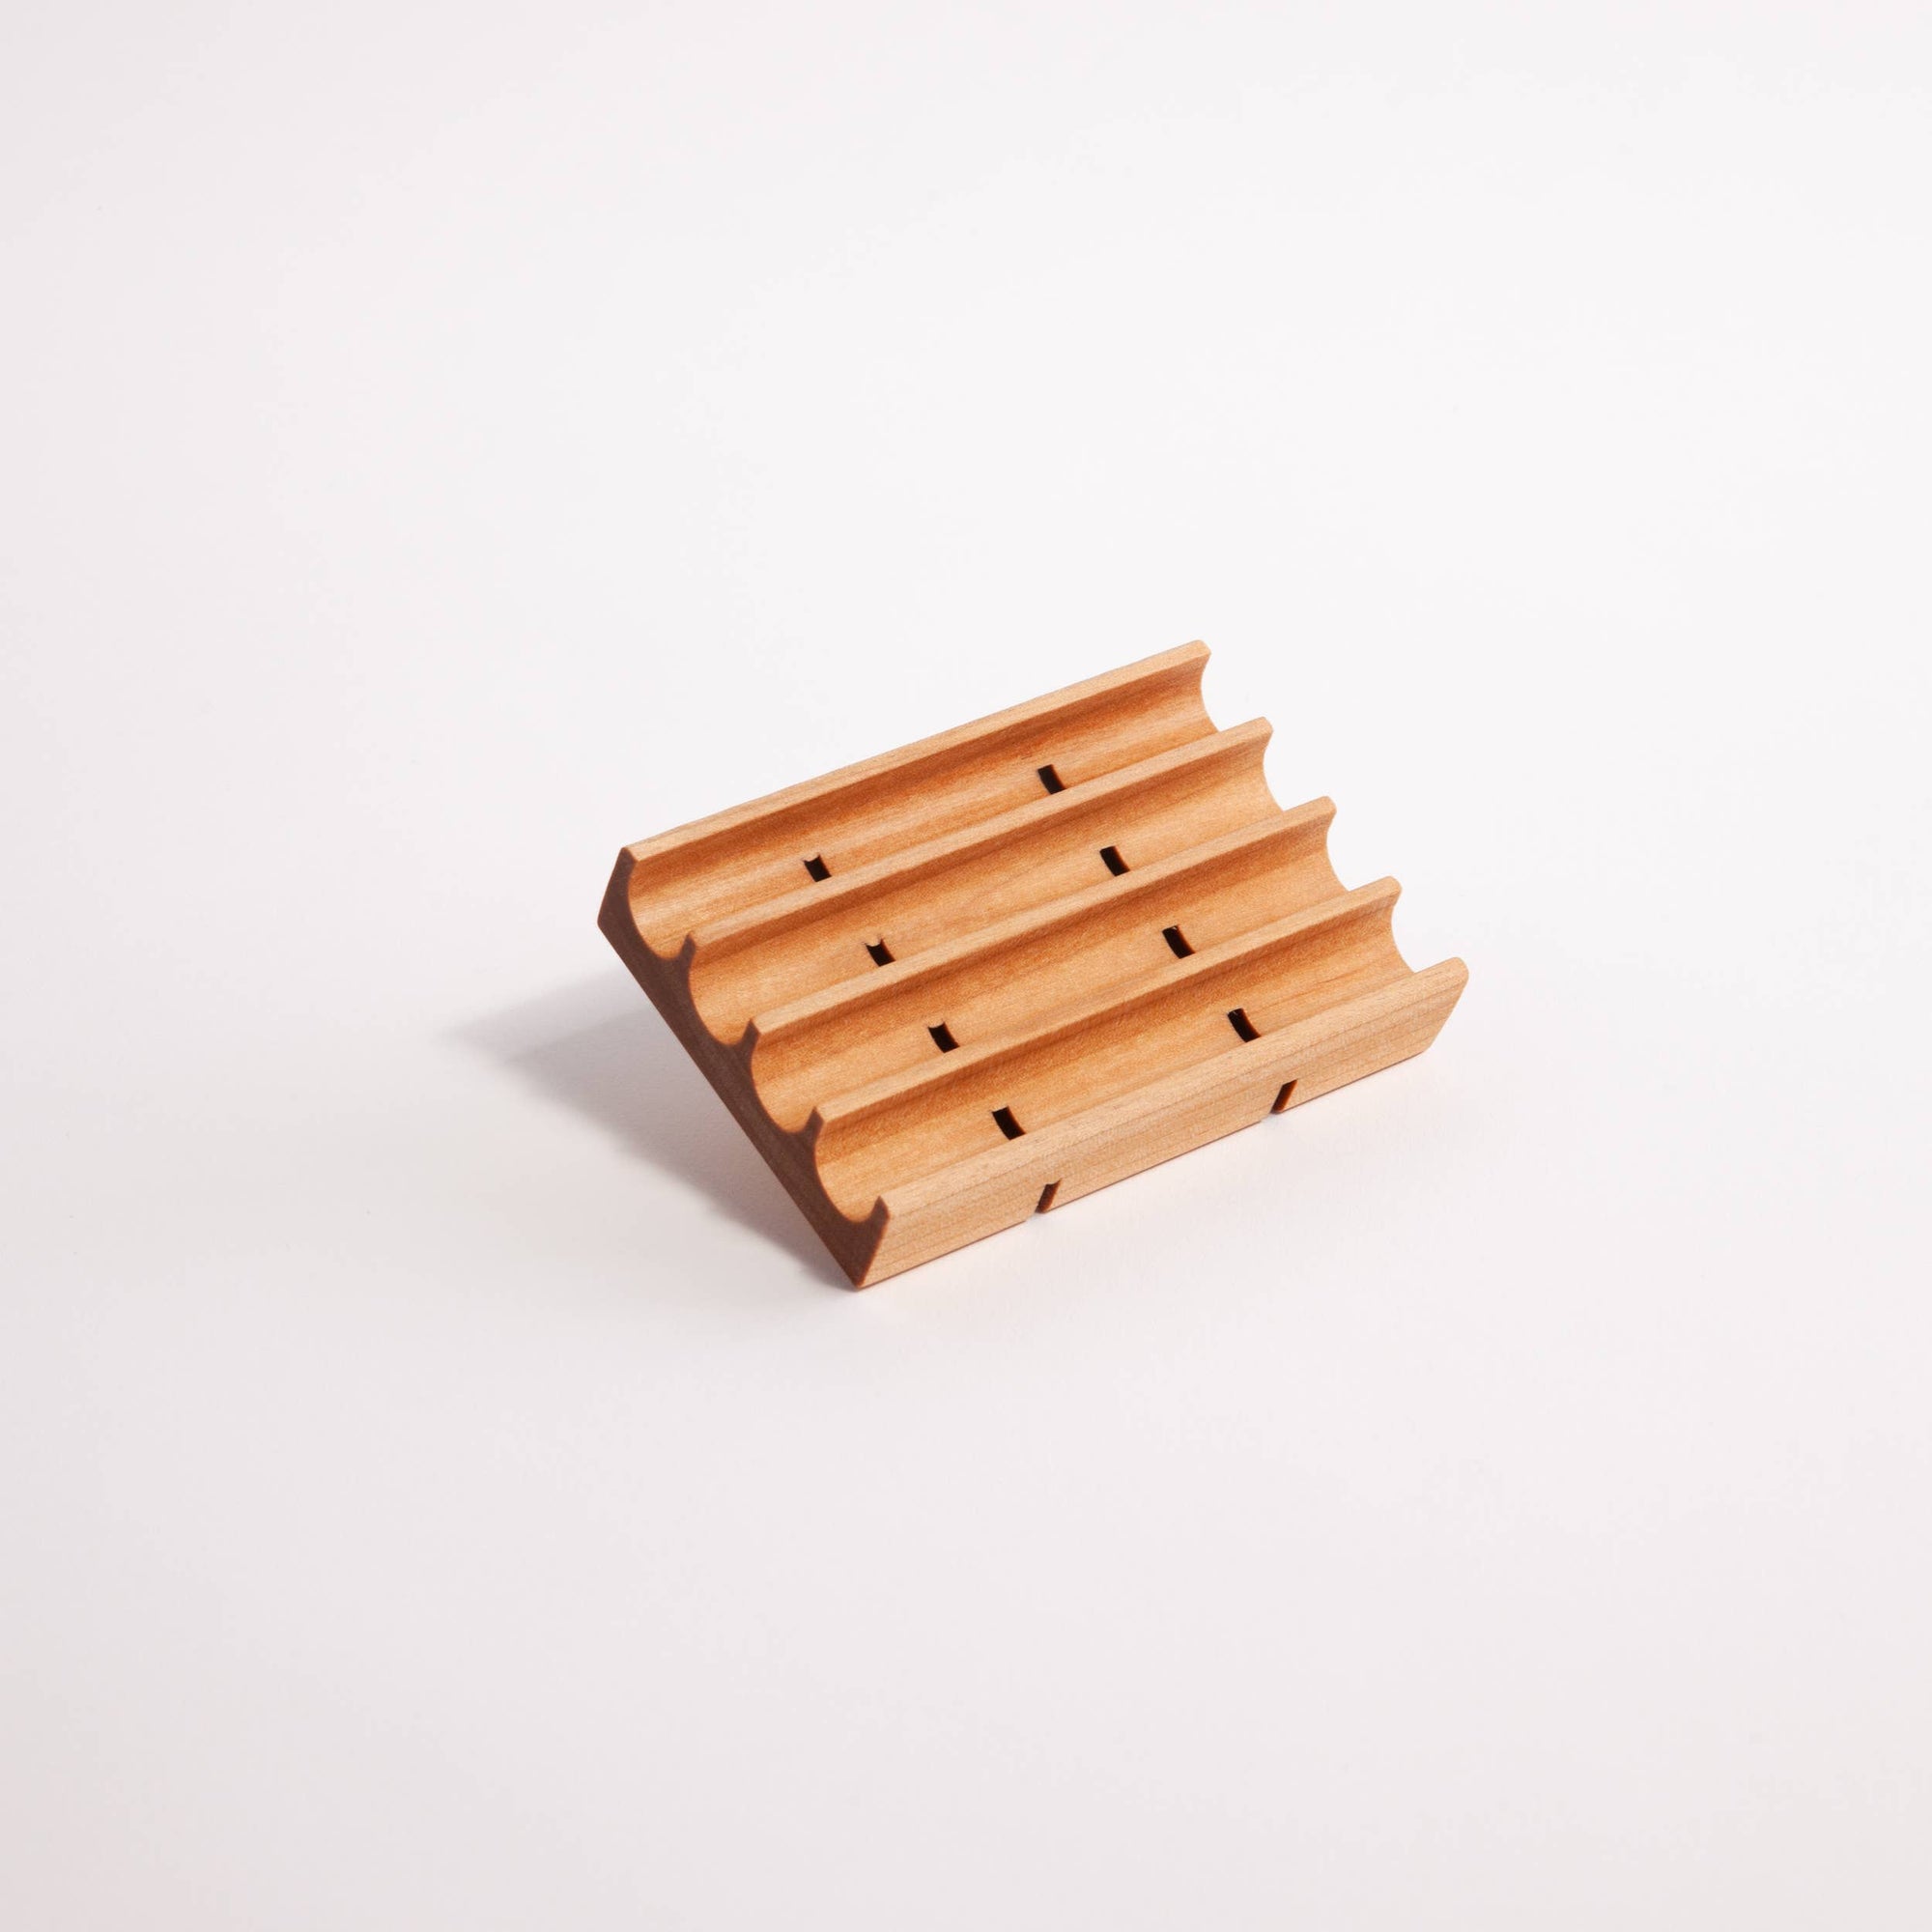 Wooden Soap Dishes (3 options): Cherry - The Unoriginal Bathroom Co.